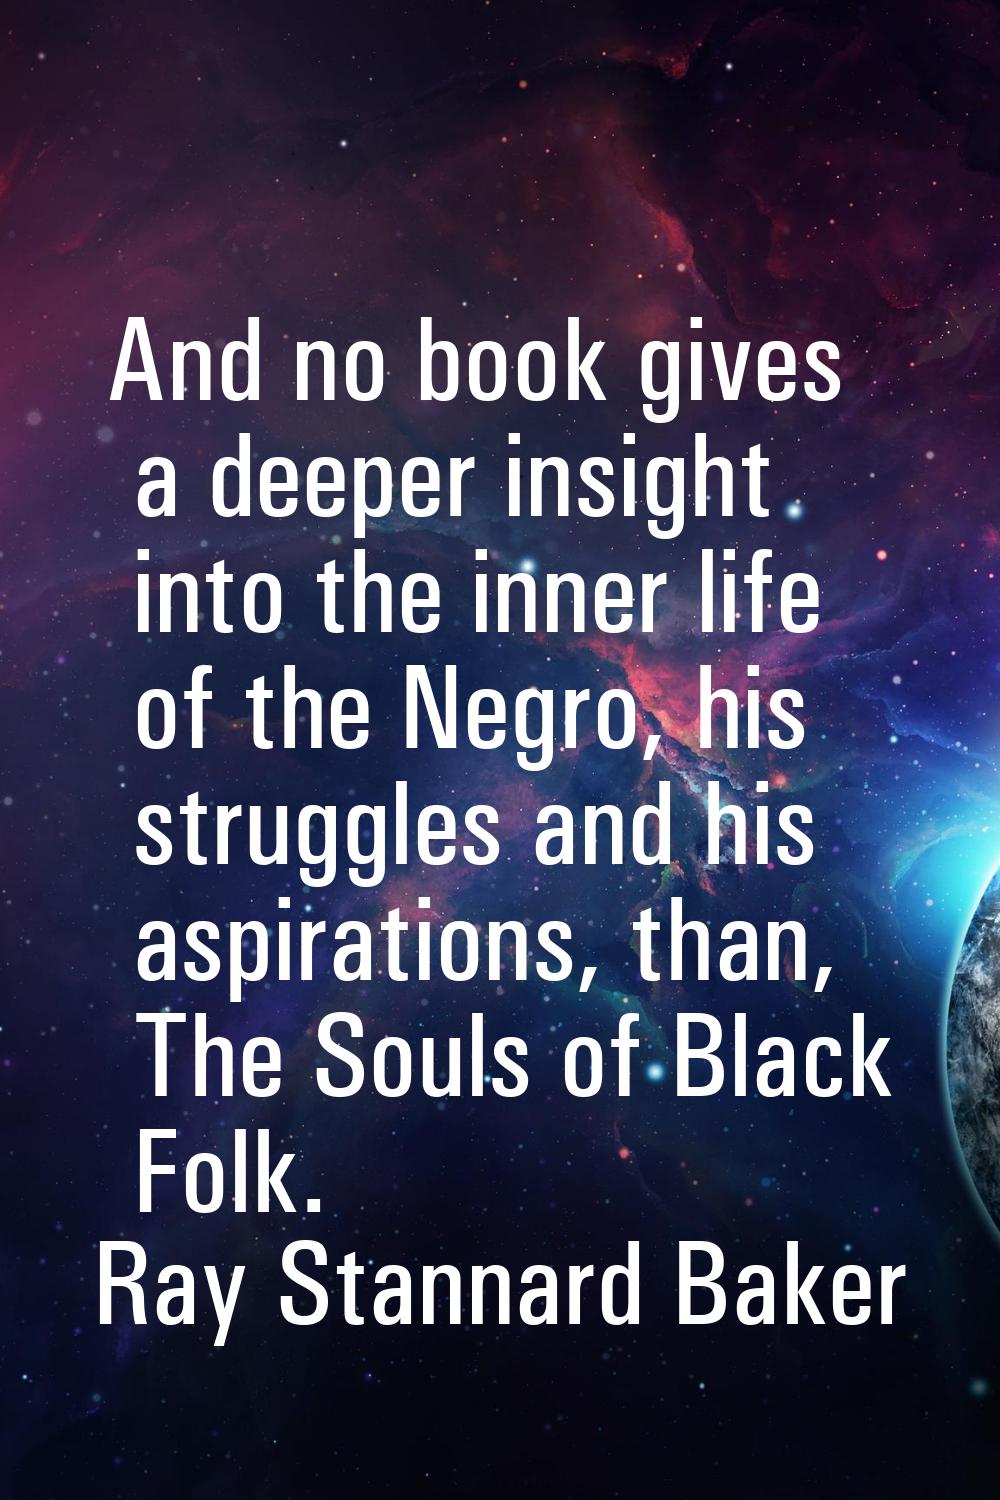 And no book gives a deeper insight into the inner life of the Negro, his struggles and his aspirati